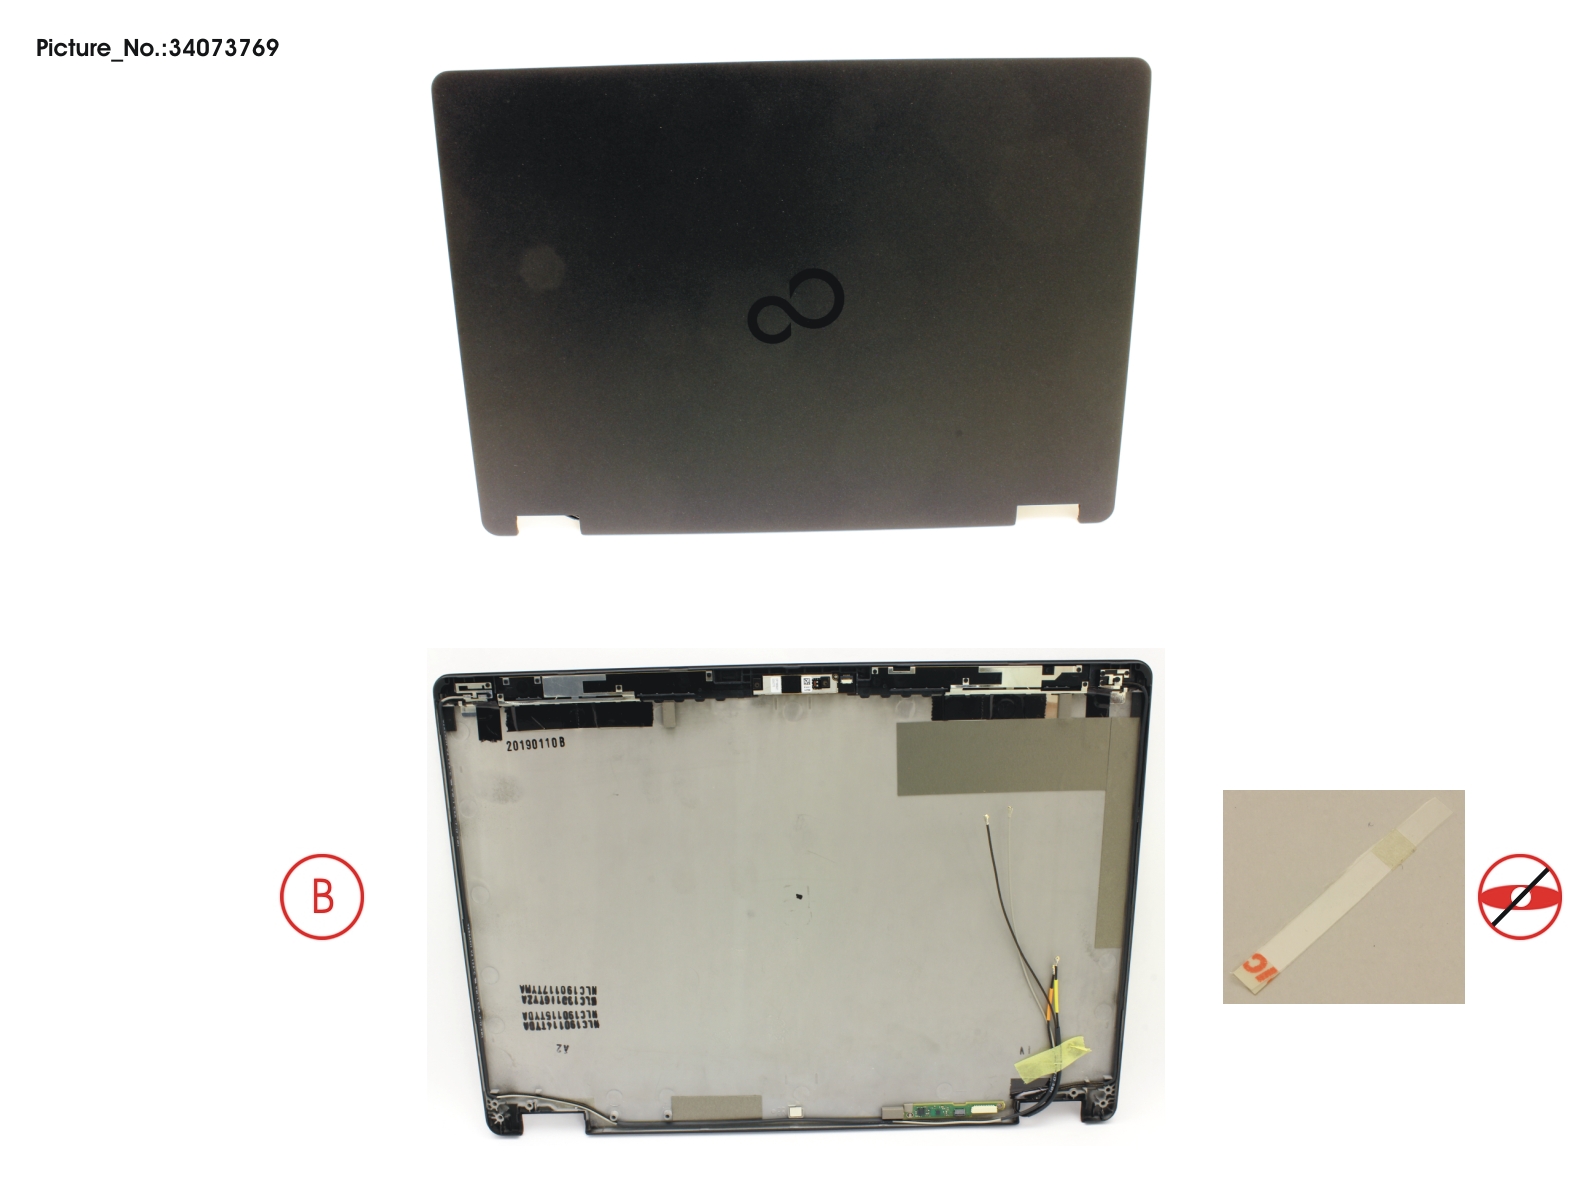 LCD BACK COVER ASSY (FOR FHD,W/MIC,WWAN)